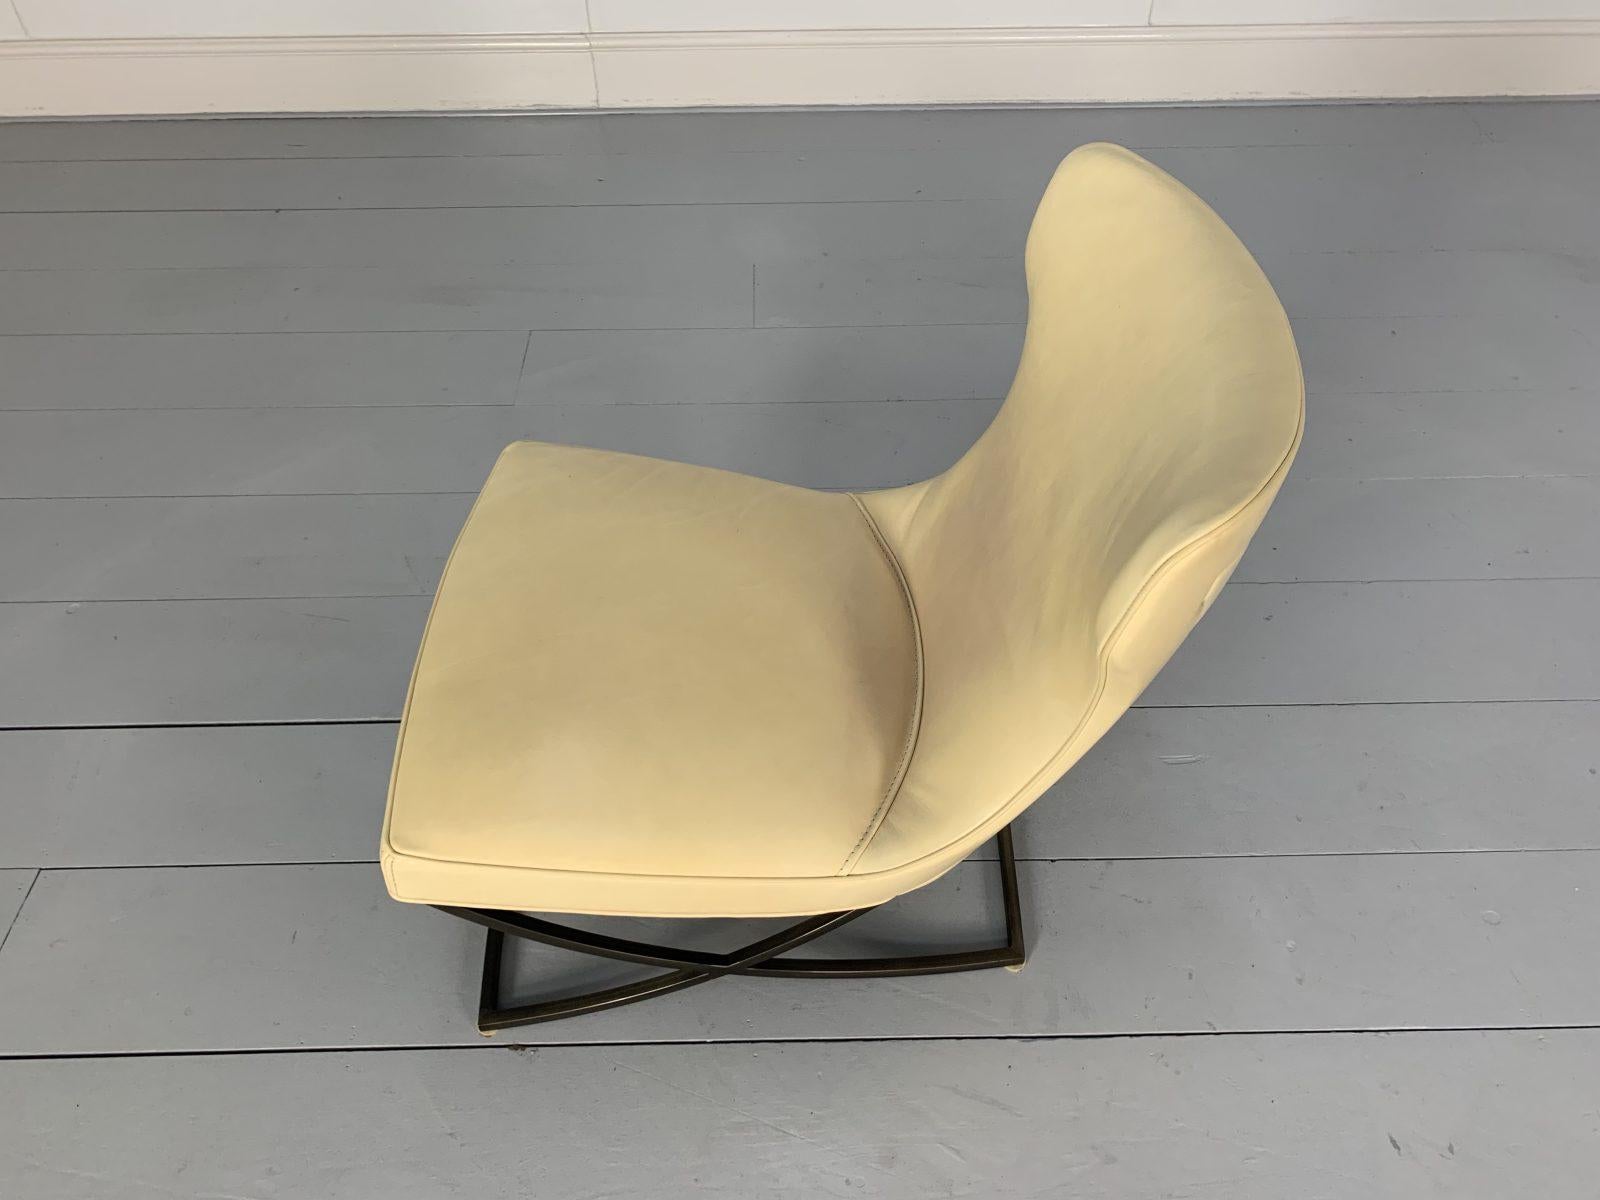 Pair of Baxter “Paloma” Chairs, in Cream Leather For Sale 8